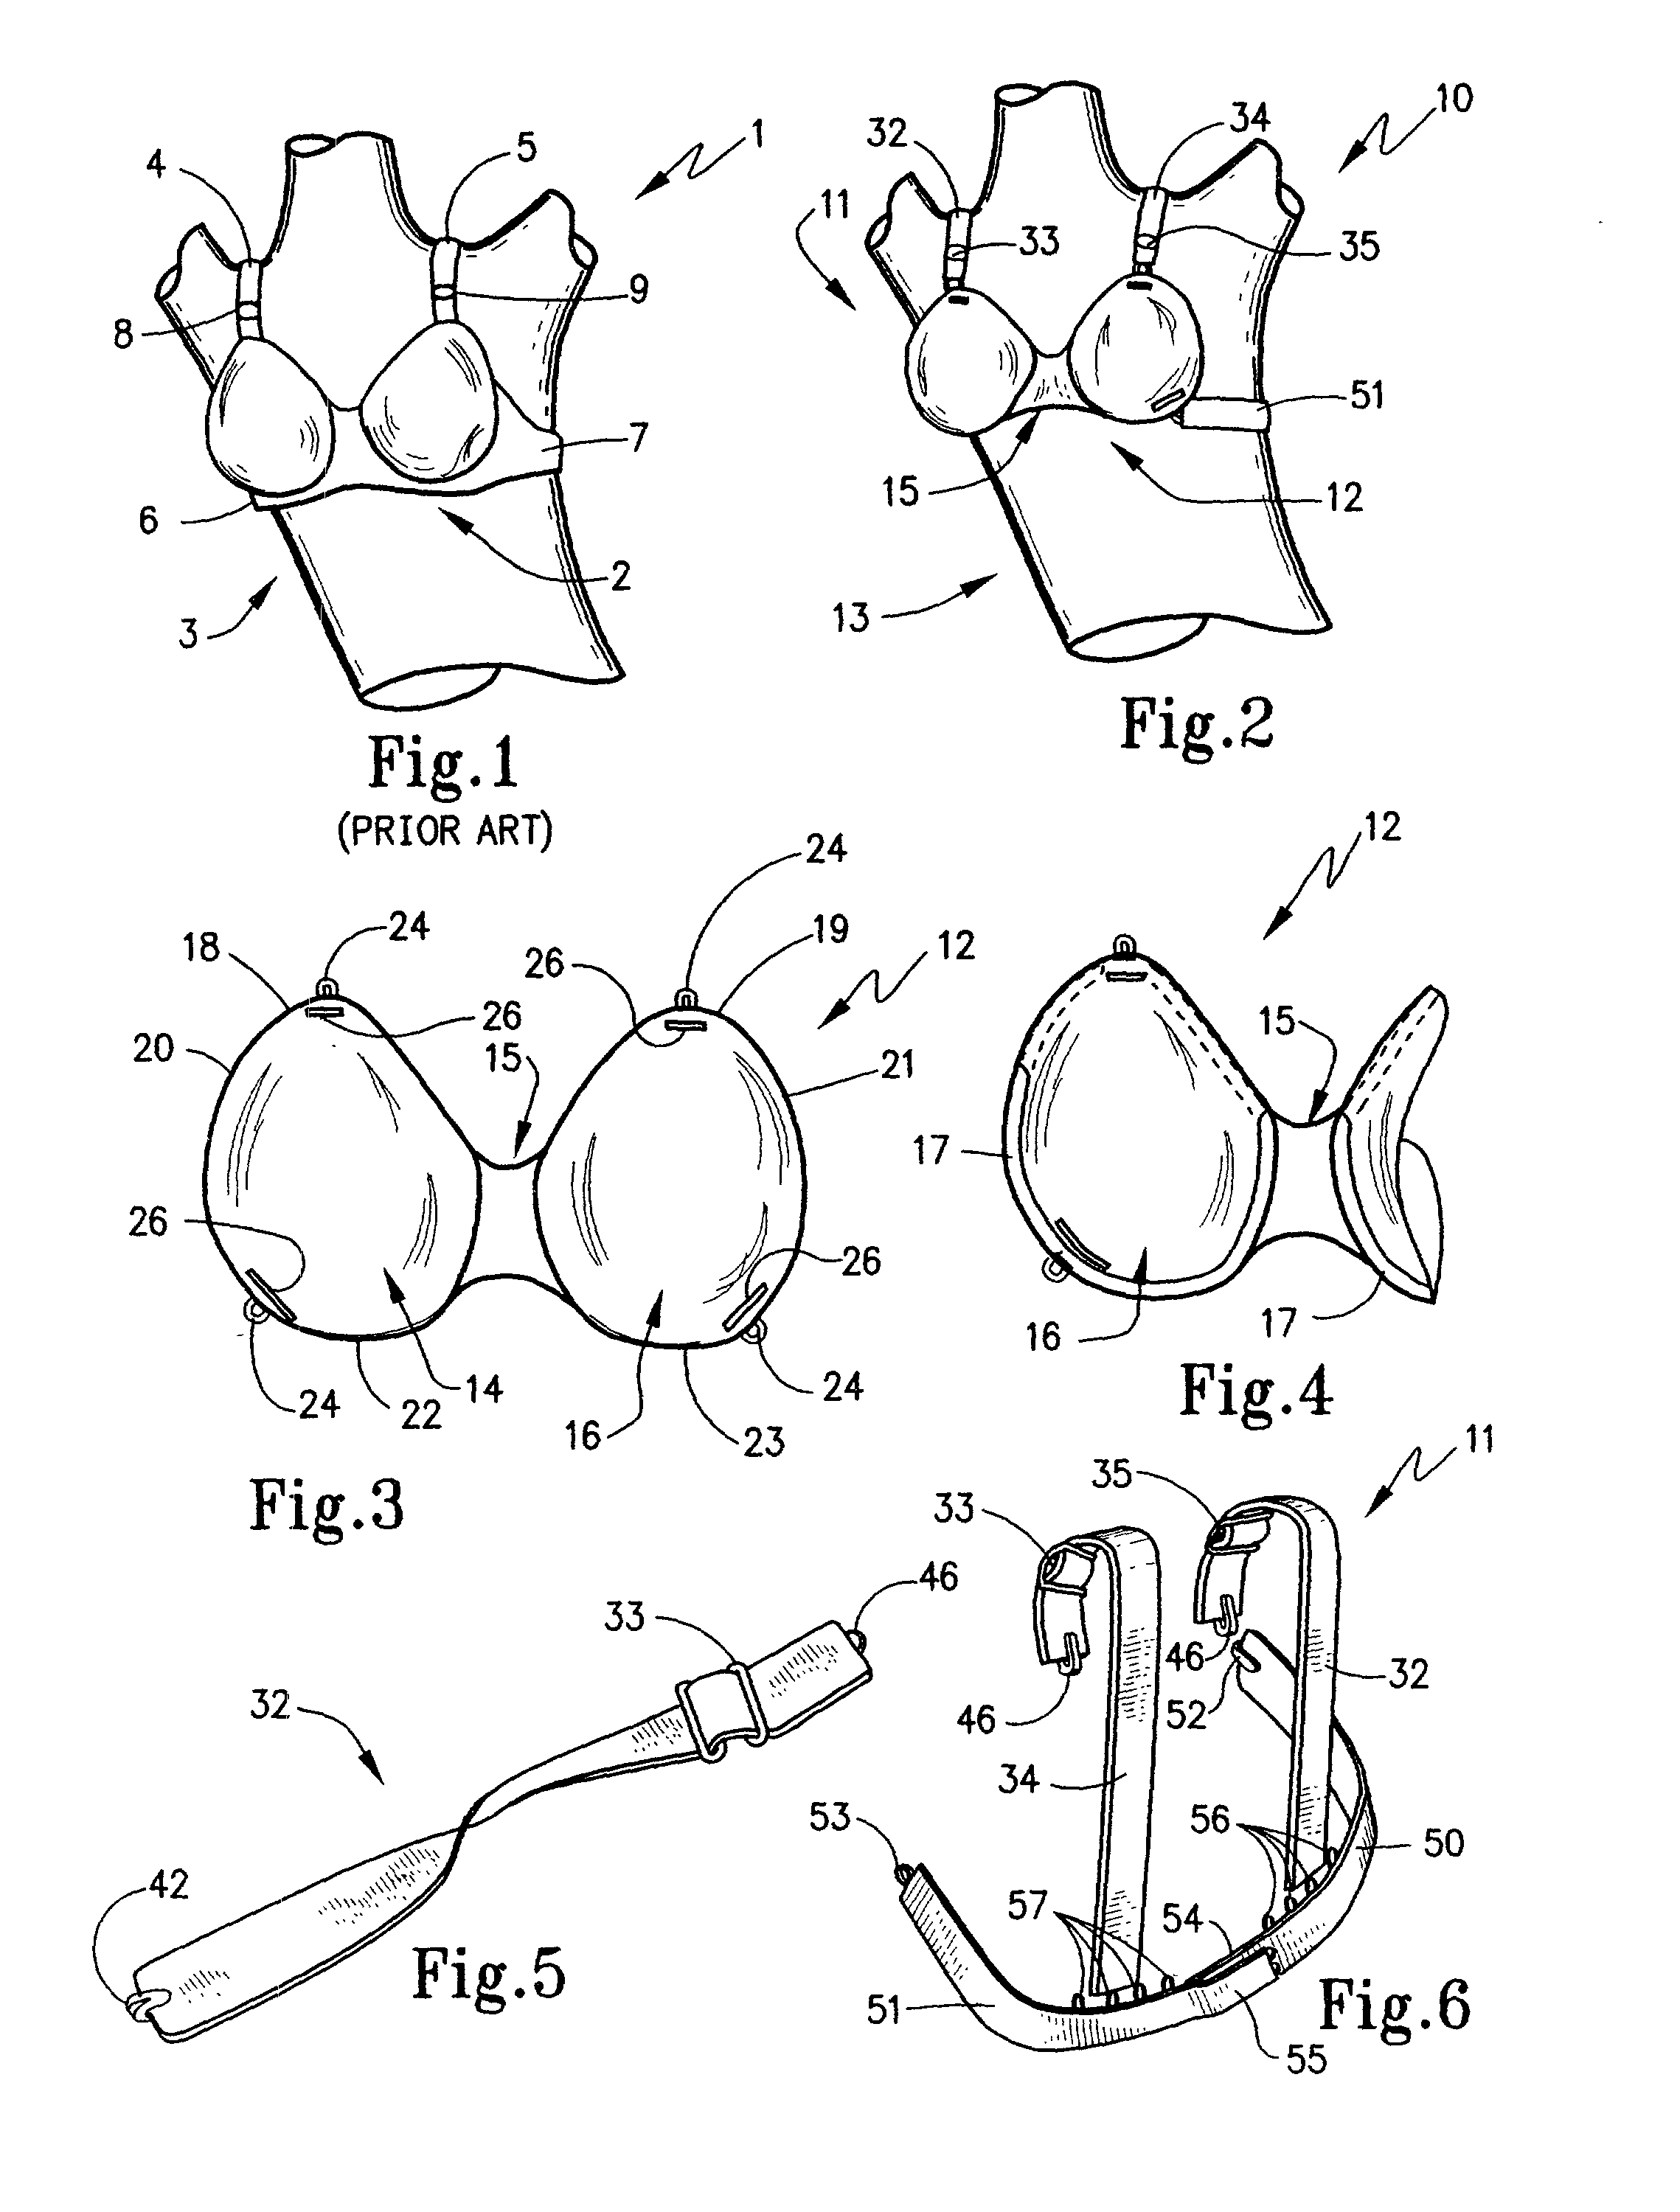 Breast support garment system and method therefor